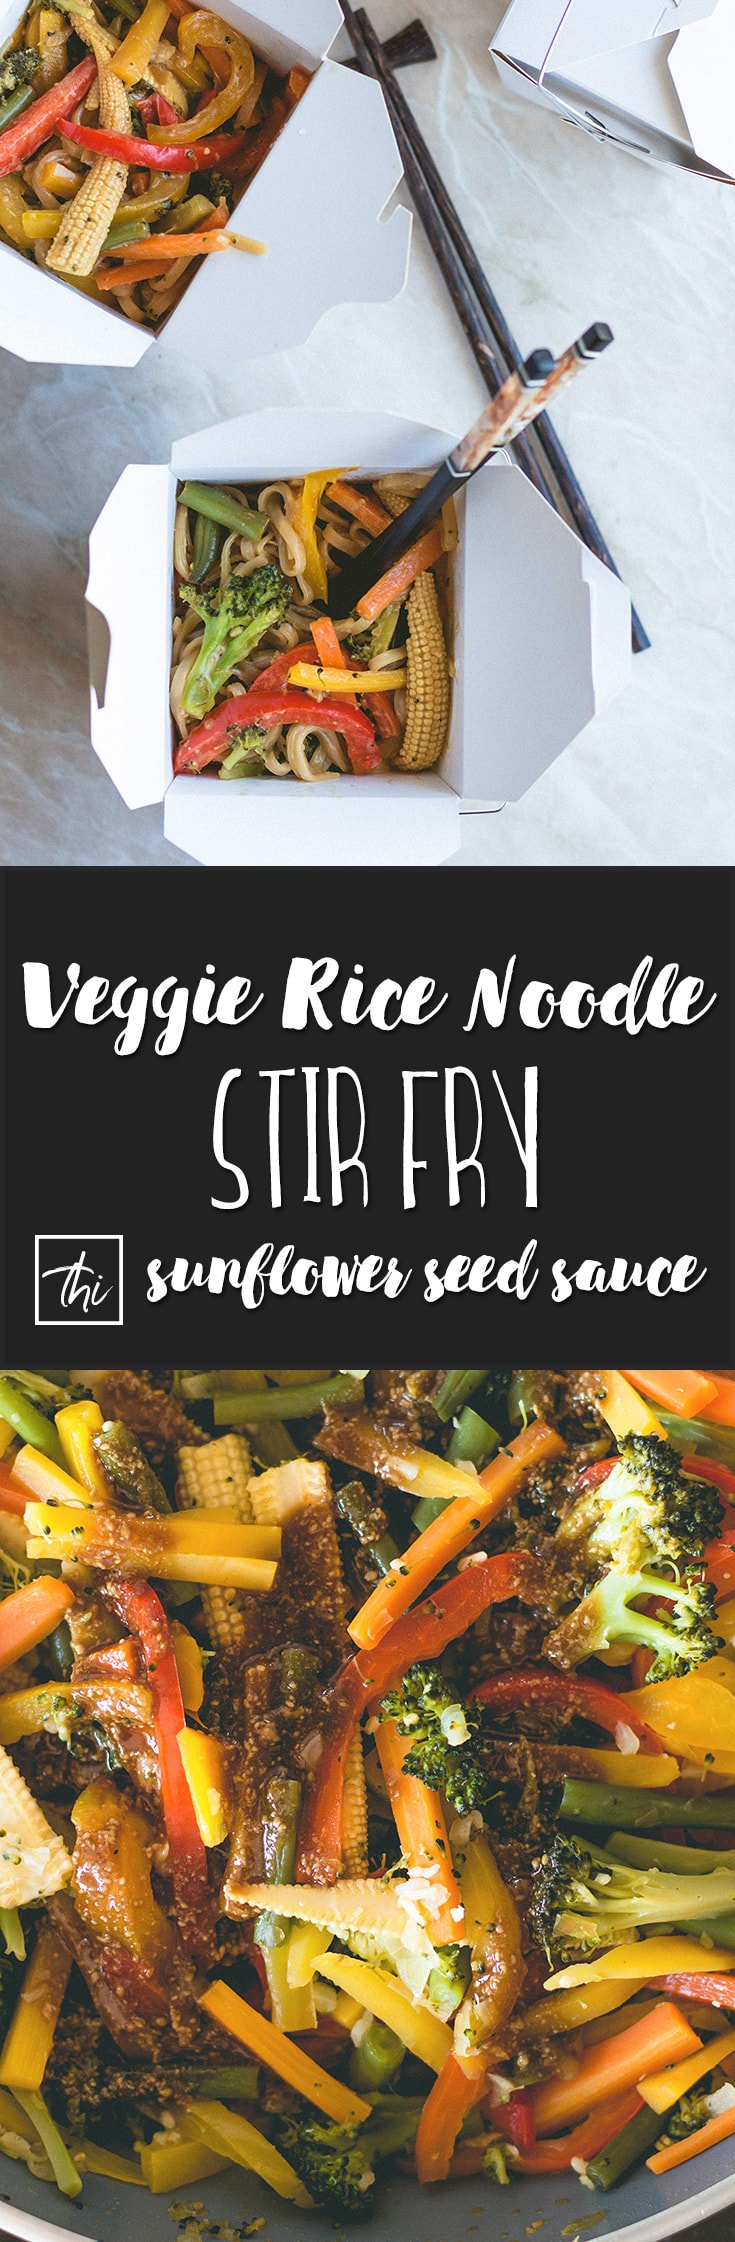 Vegetable Stir Fry with Rice Noodles and Sunflower Seed Sauce - delicious vegan stir fry with peanut-free sauce made with tamari, sunflower seed butter, maple syrup, sesame oil, and ACV. You'll love this recipe! | thehealthfulideas.com